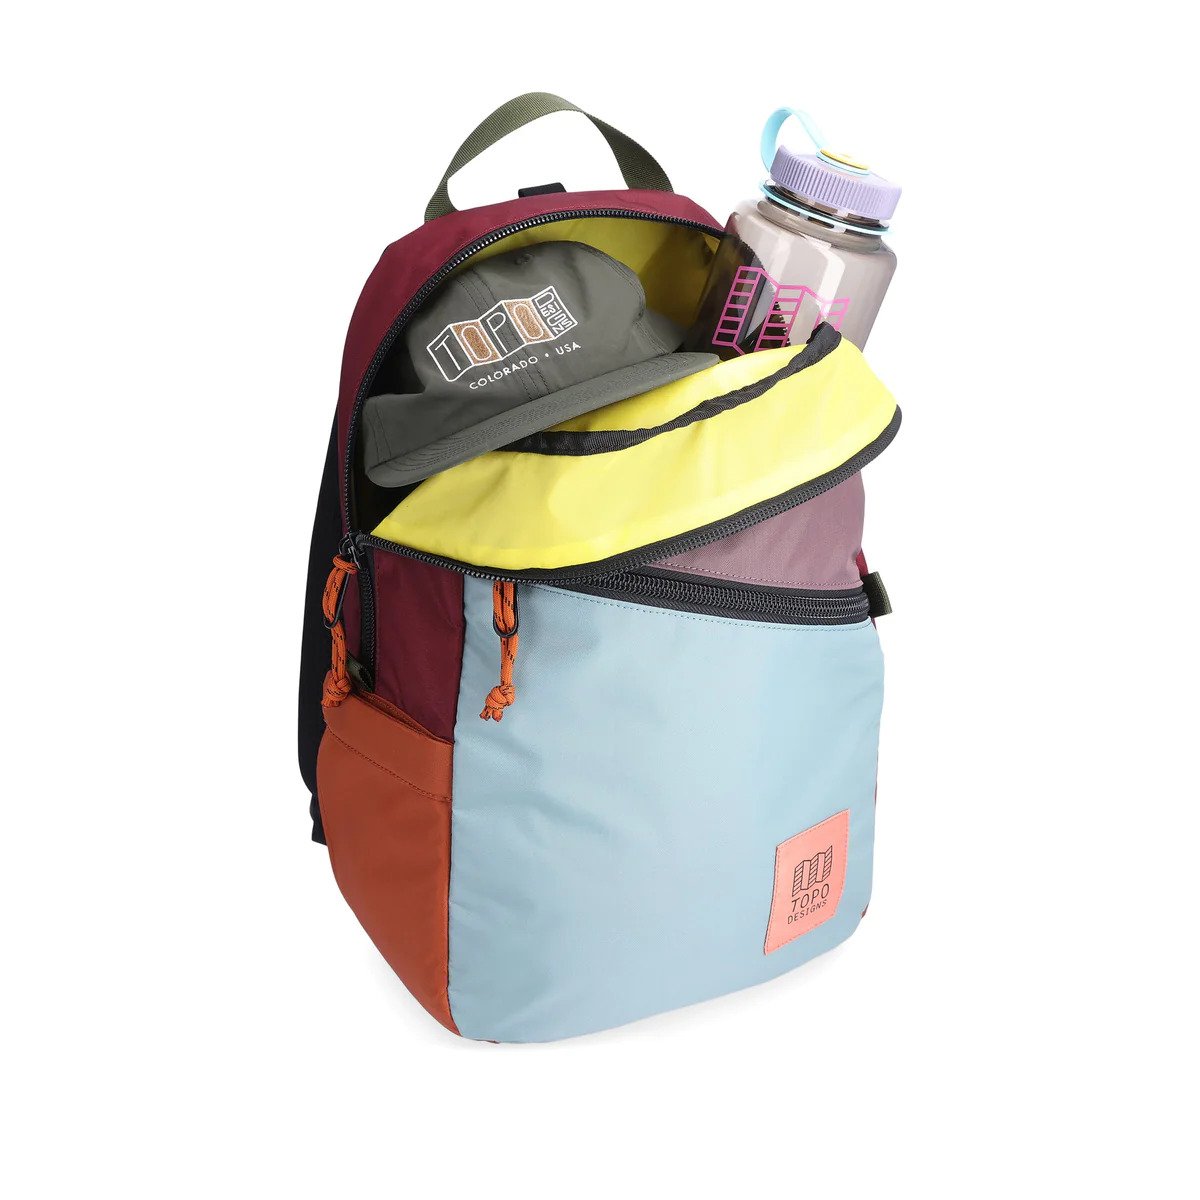 Open main compartment view of Topo Designs Light Pack in recycled "Mineral Blue / Peppercorn" nylon.